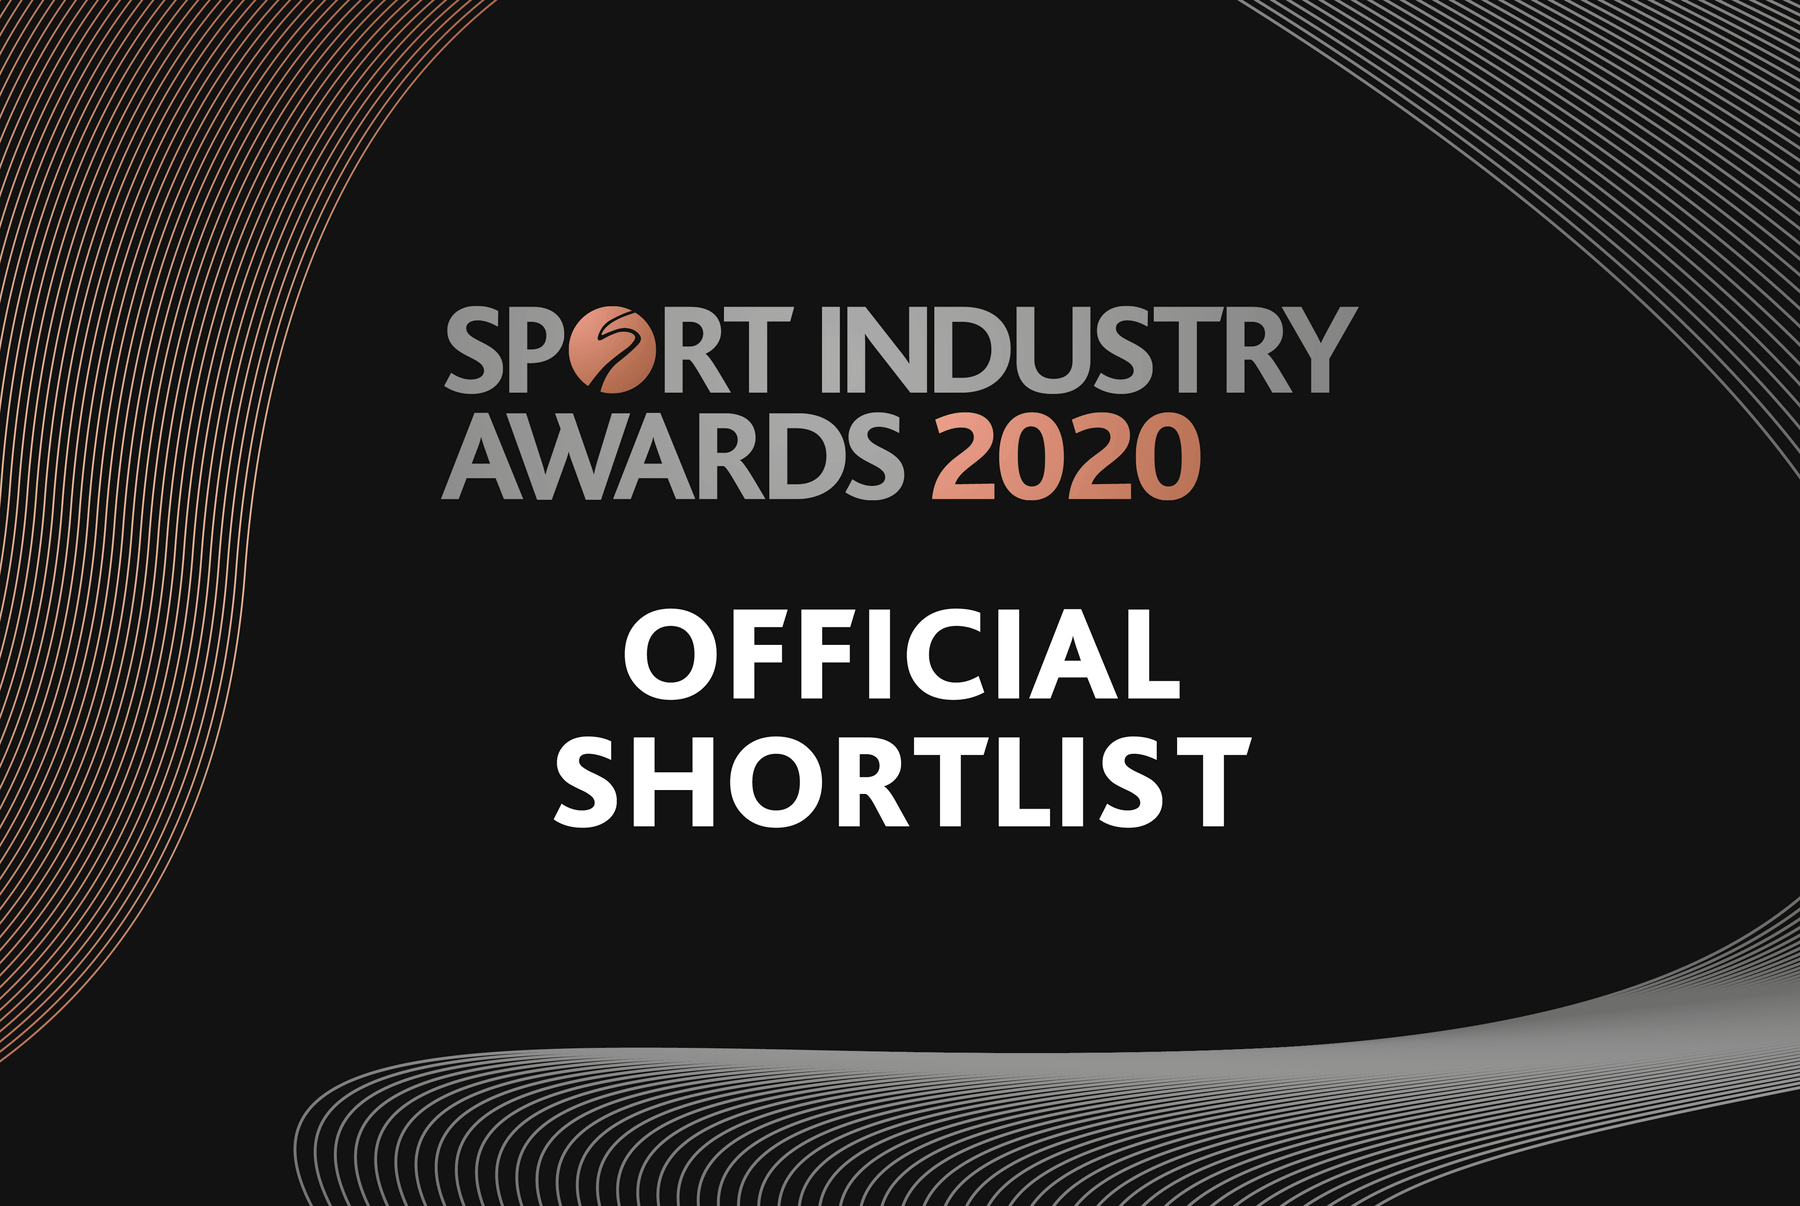 Fifty Digital shortlisted for Sport Industry Awards 2020 Official